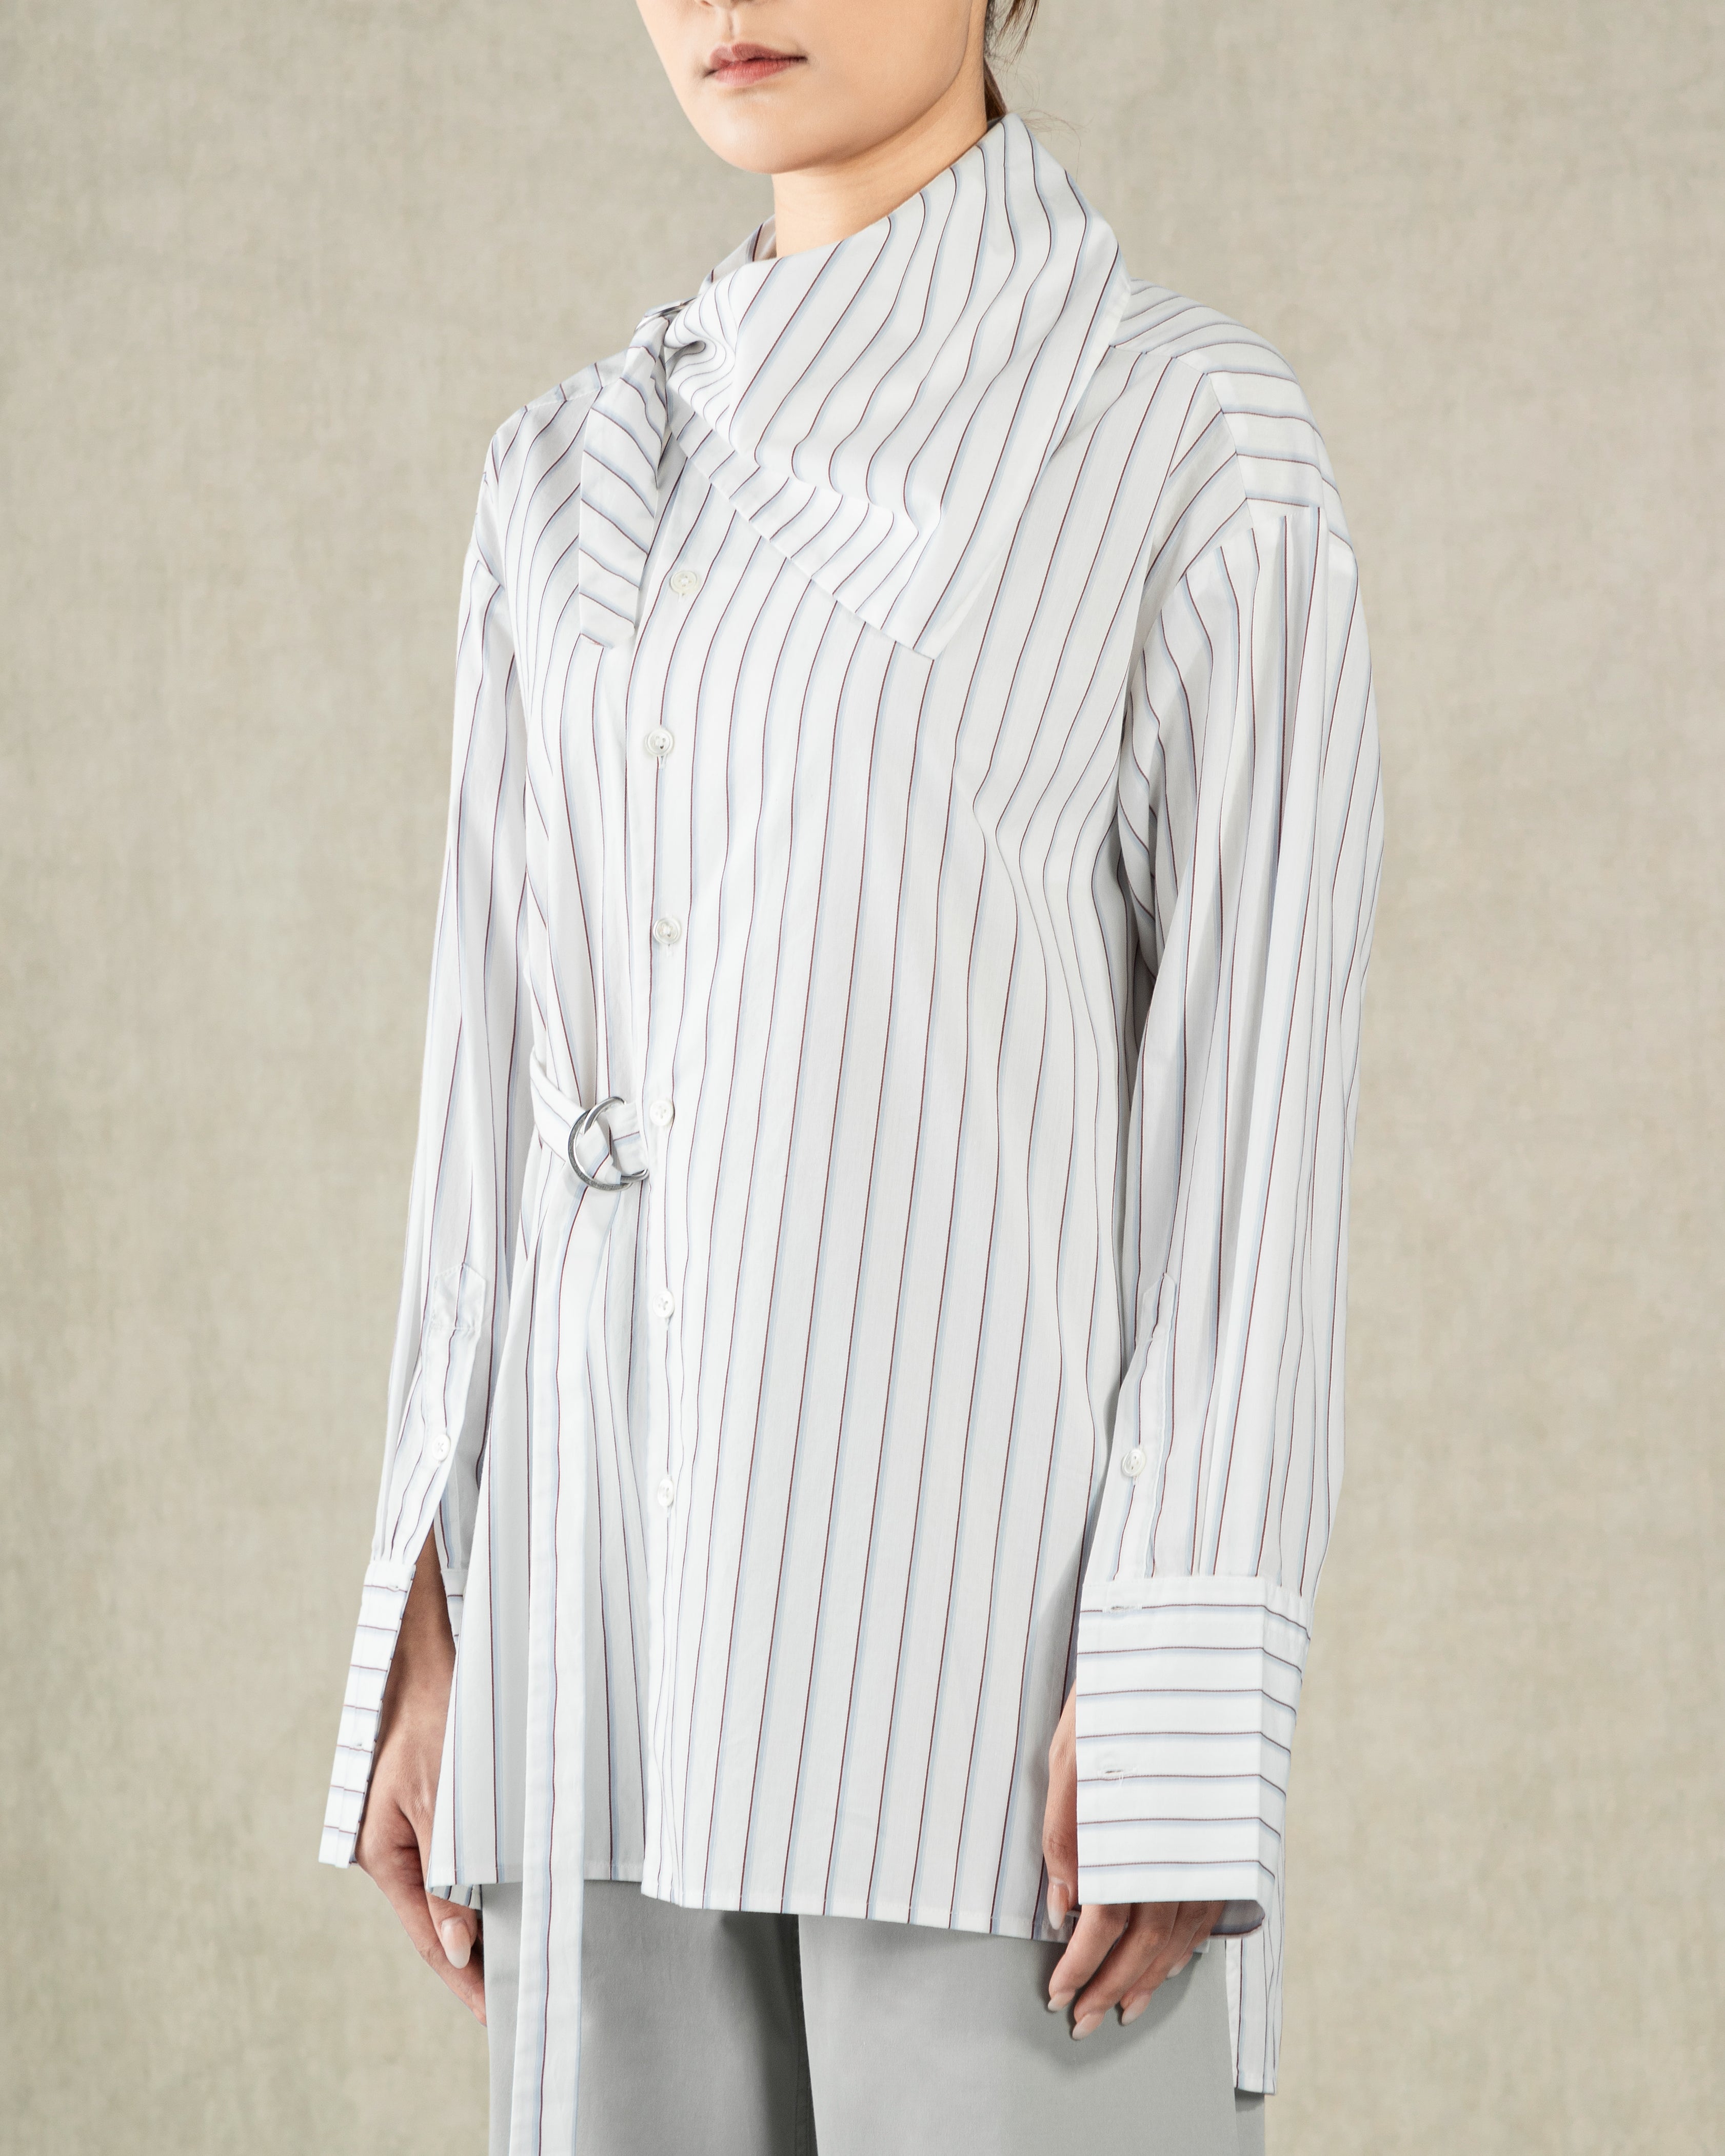 Pure White Stripe Striped Neck Scarf Shirt Womens Adjustable Buttoned Top